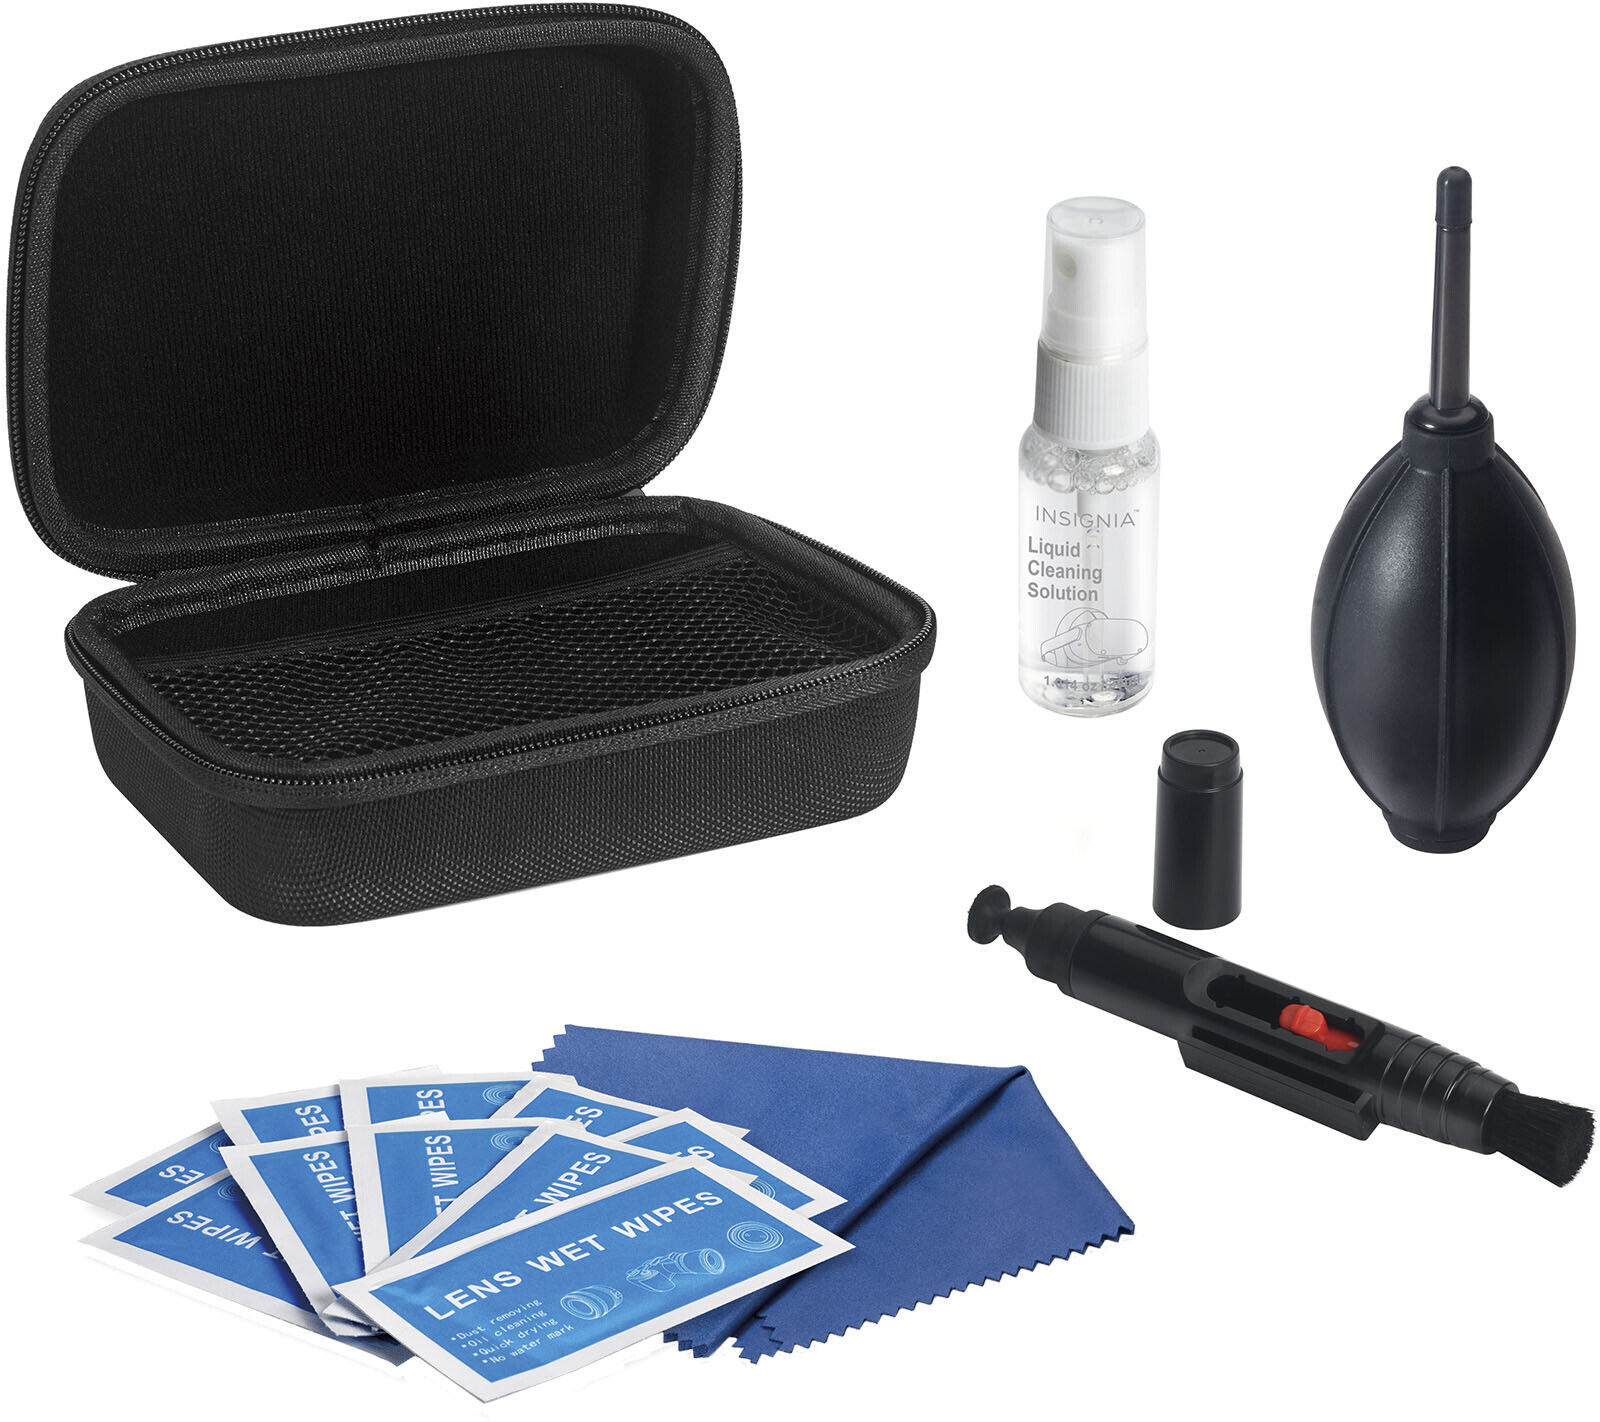 Primary image for Insignia- Cleaning Kit for Meta Quest 2, Meta Quest Pro & other VR headsets